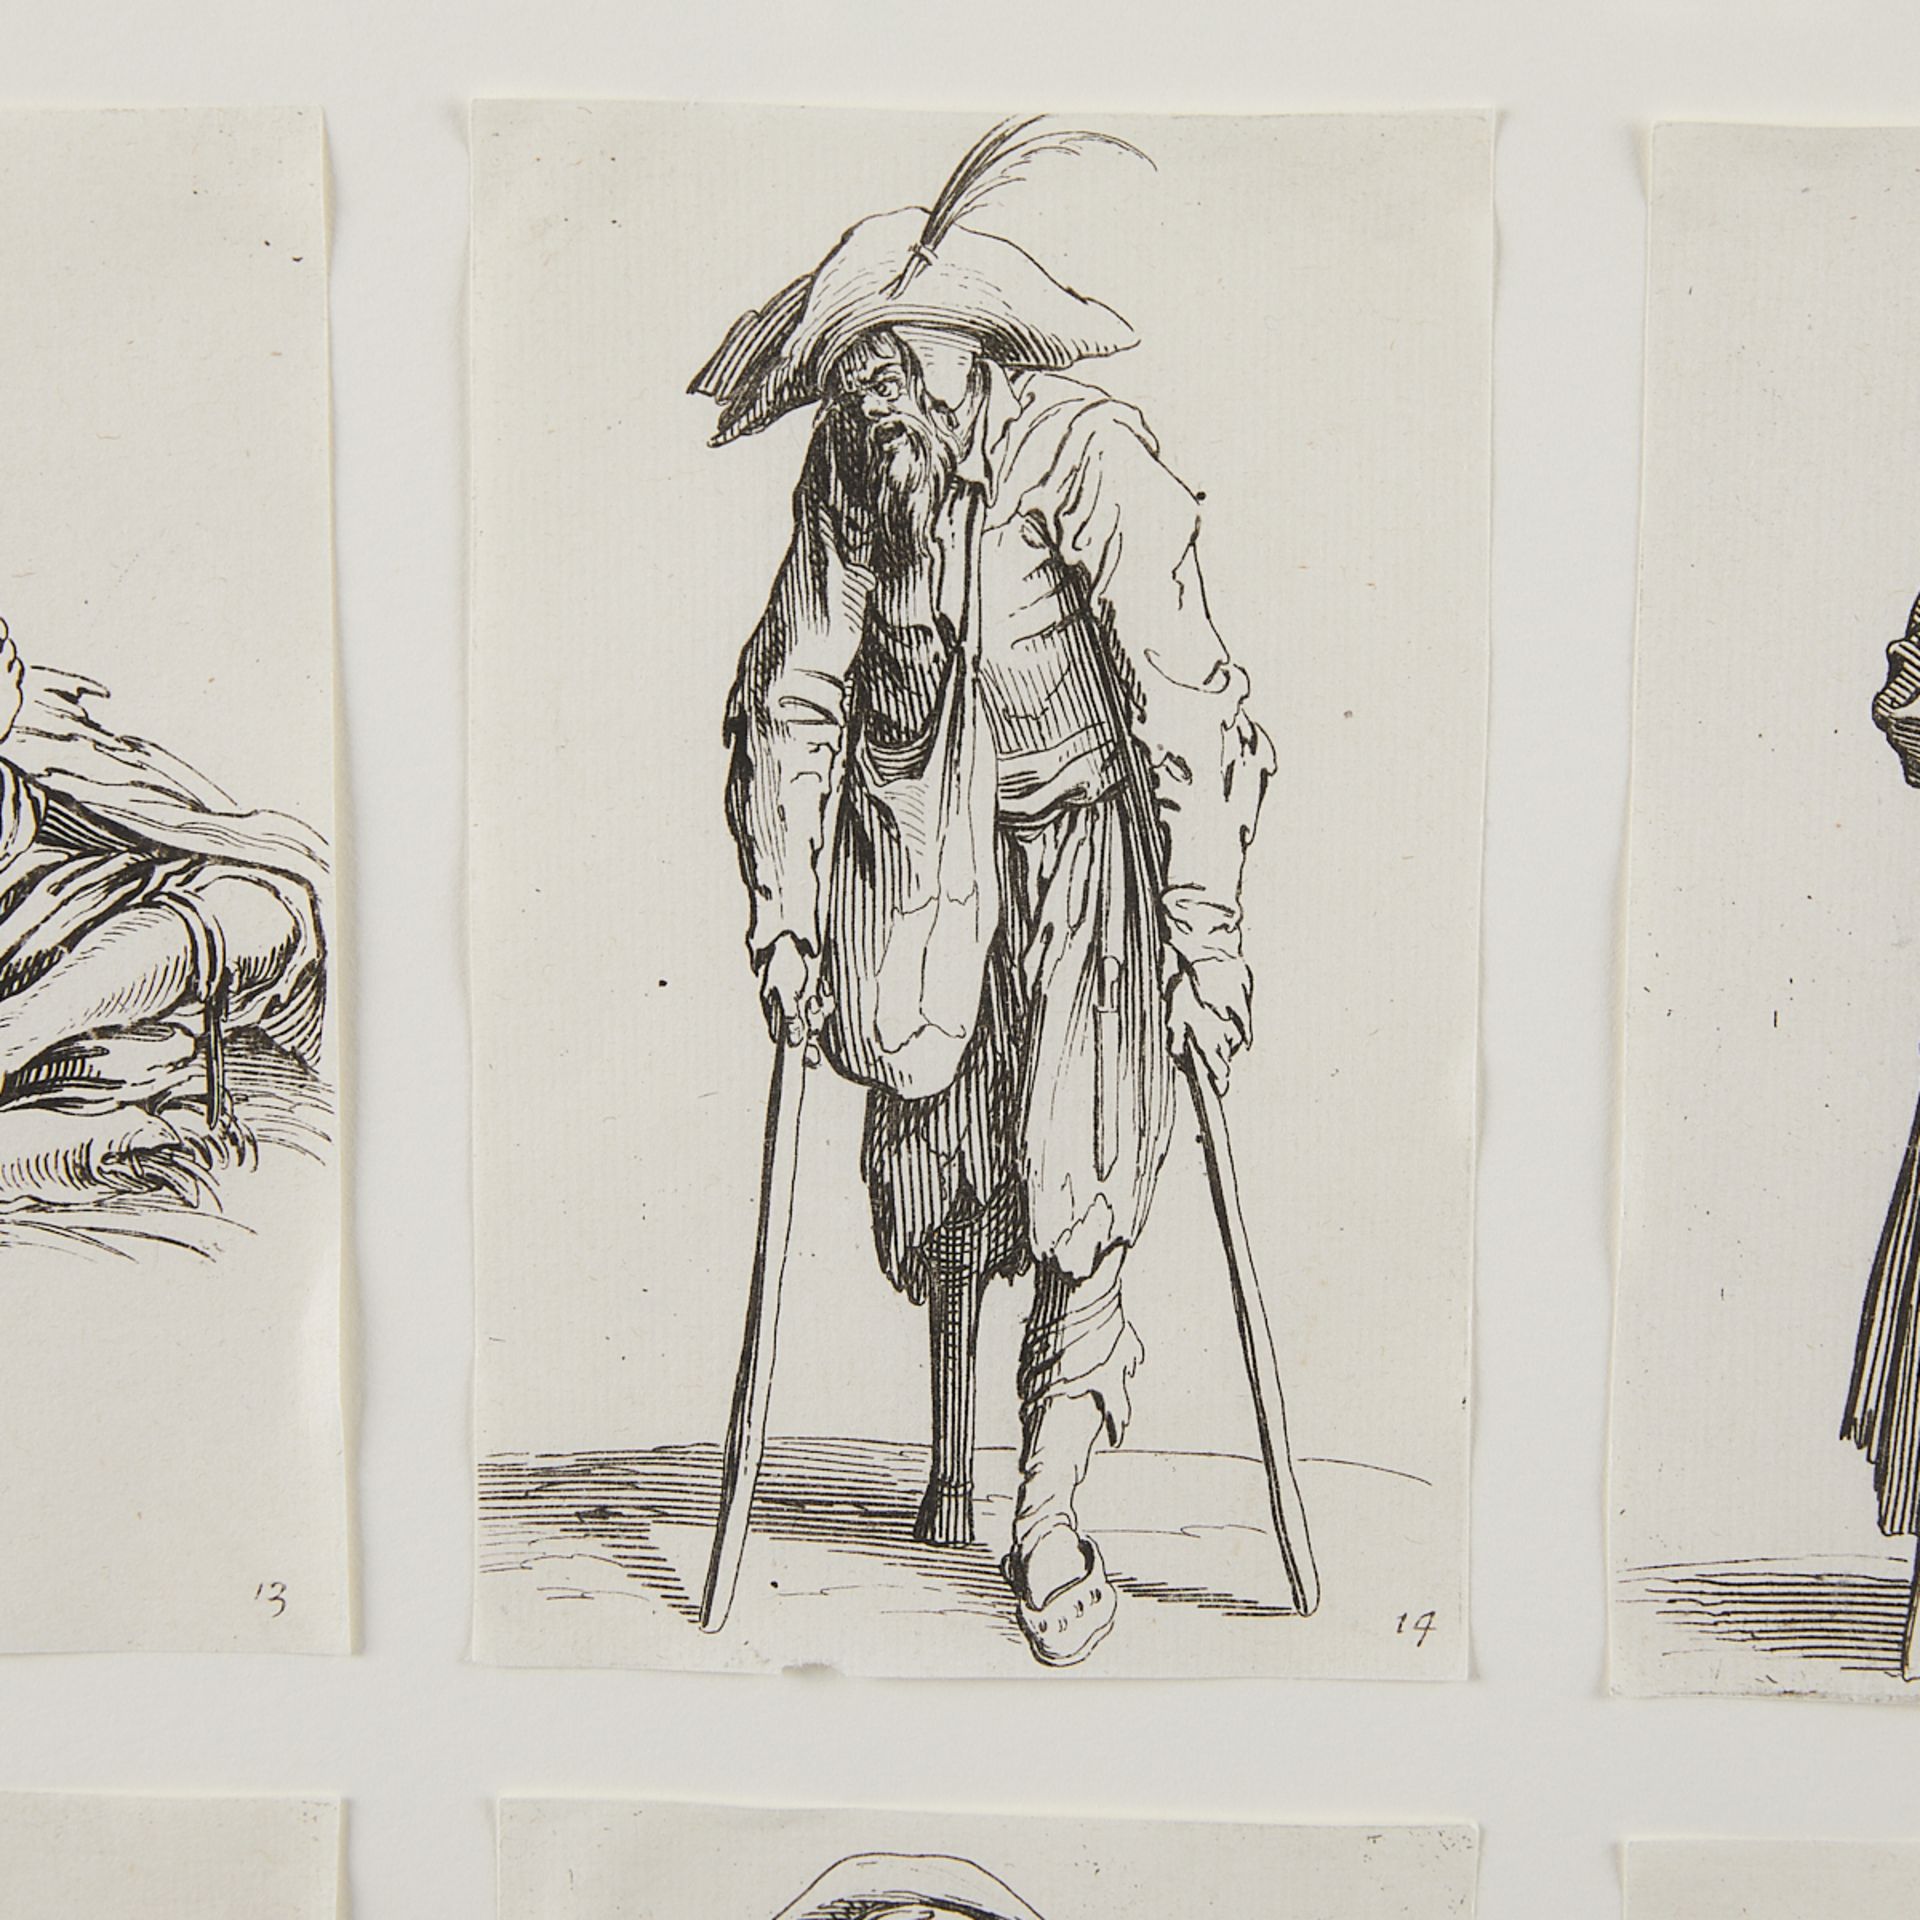 26 Etchings Jacques Callot "The Beggers" Suite - Image 14 of 25